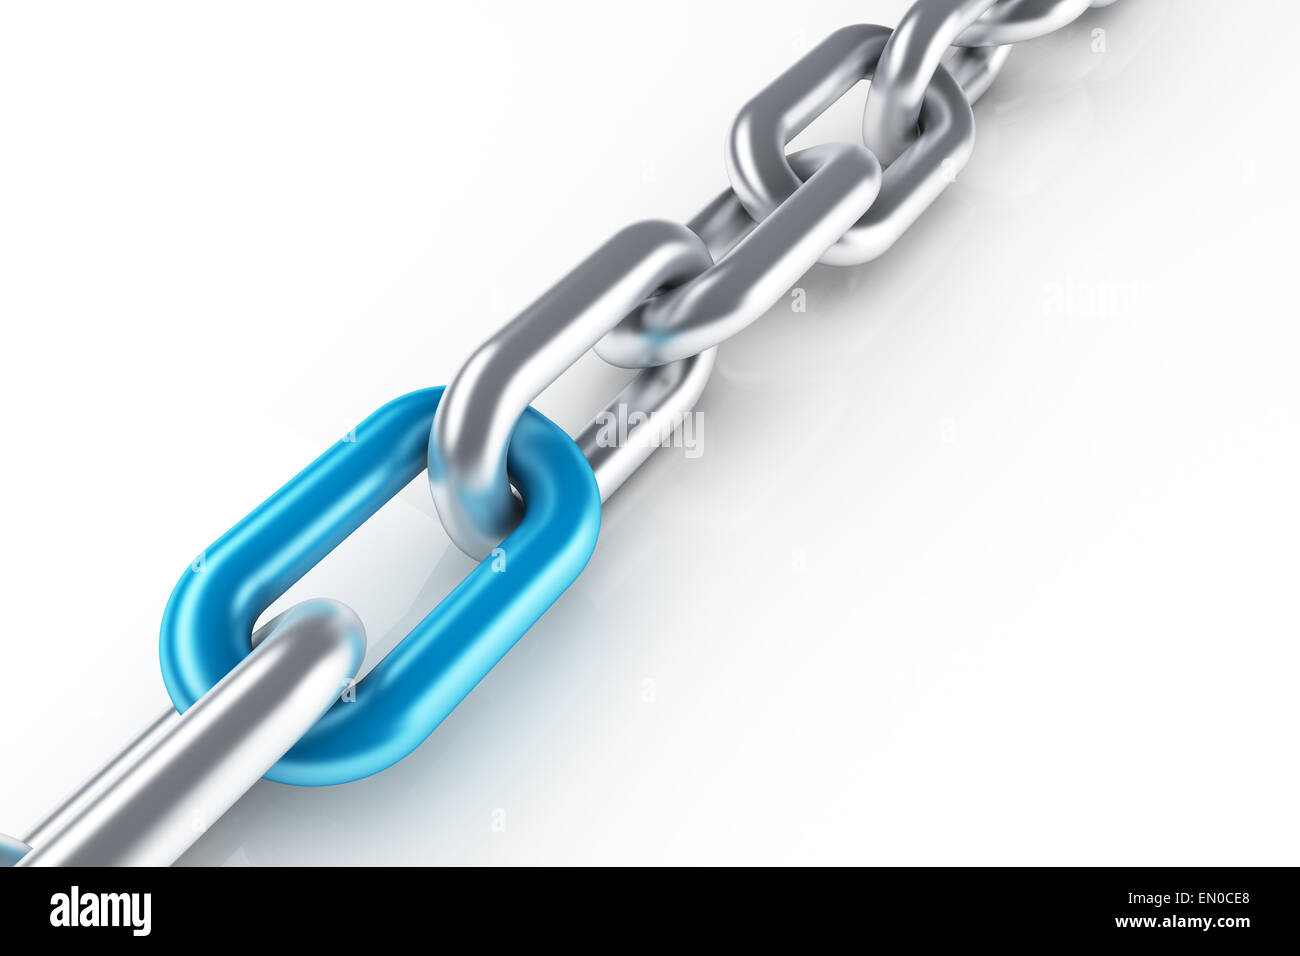 Stainless steel chain with unique blue link Stock Photo